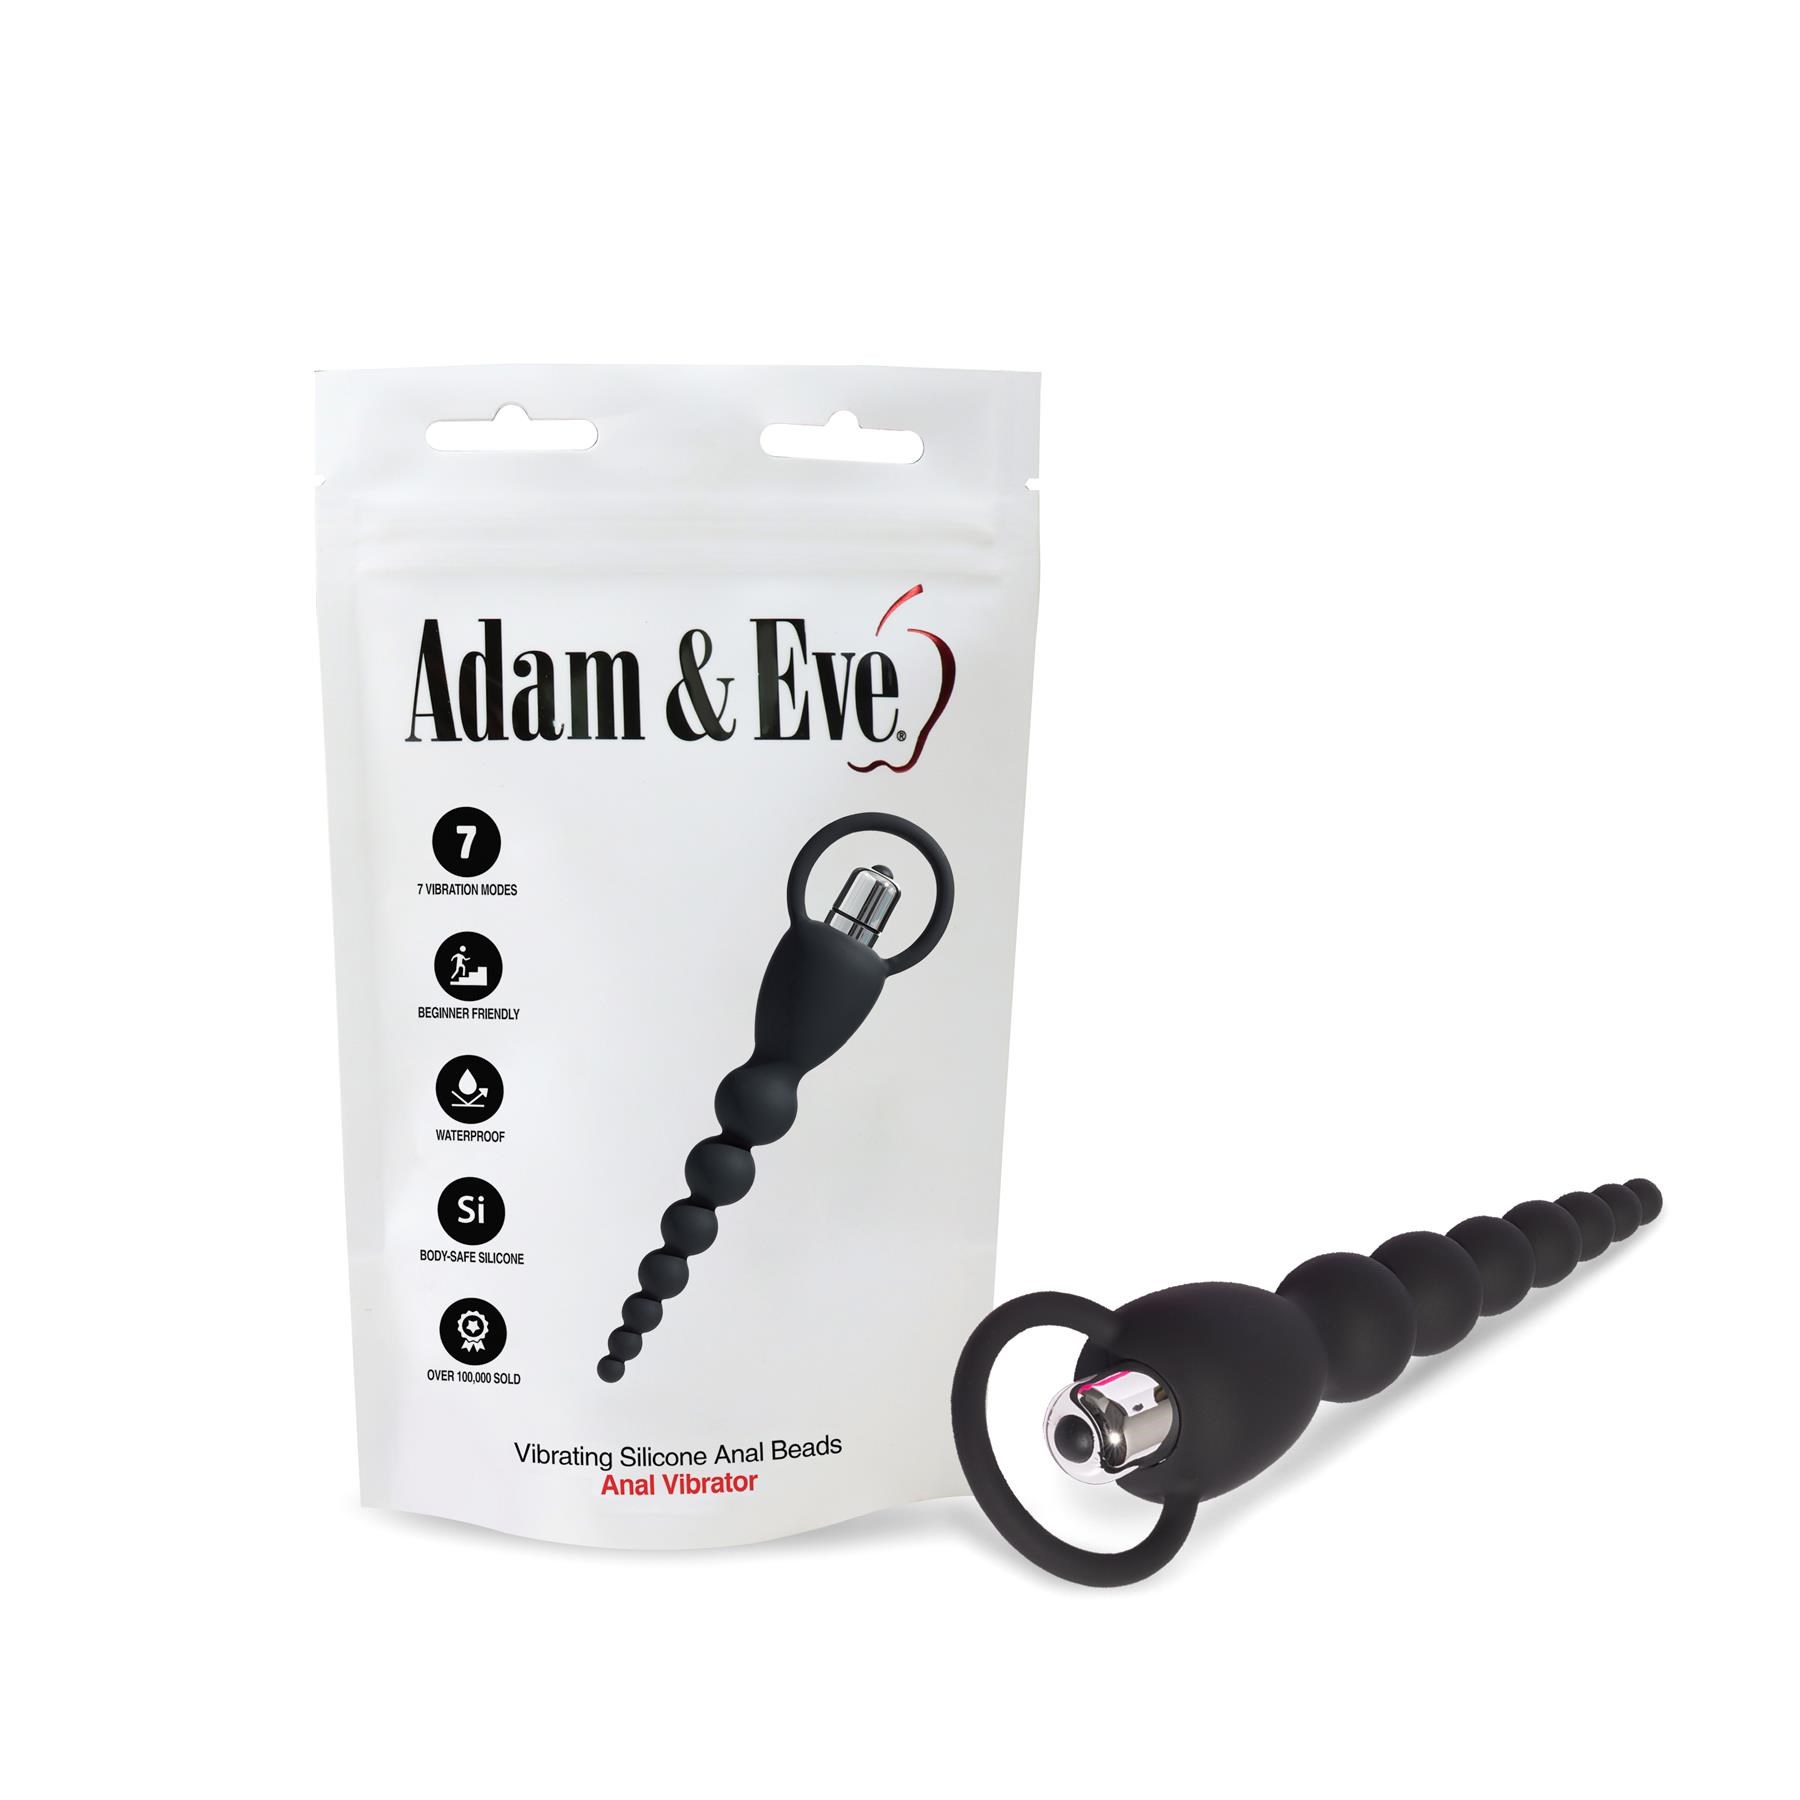 Adam & Eve Vibrating Silicone Anal Beads - Product and Packaging